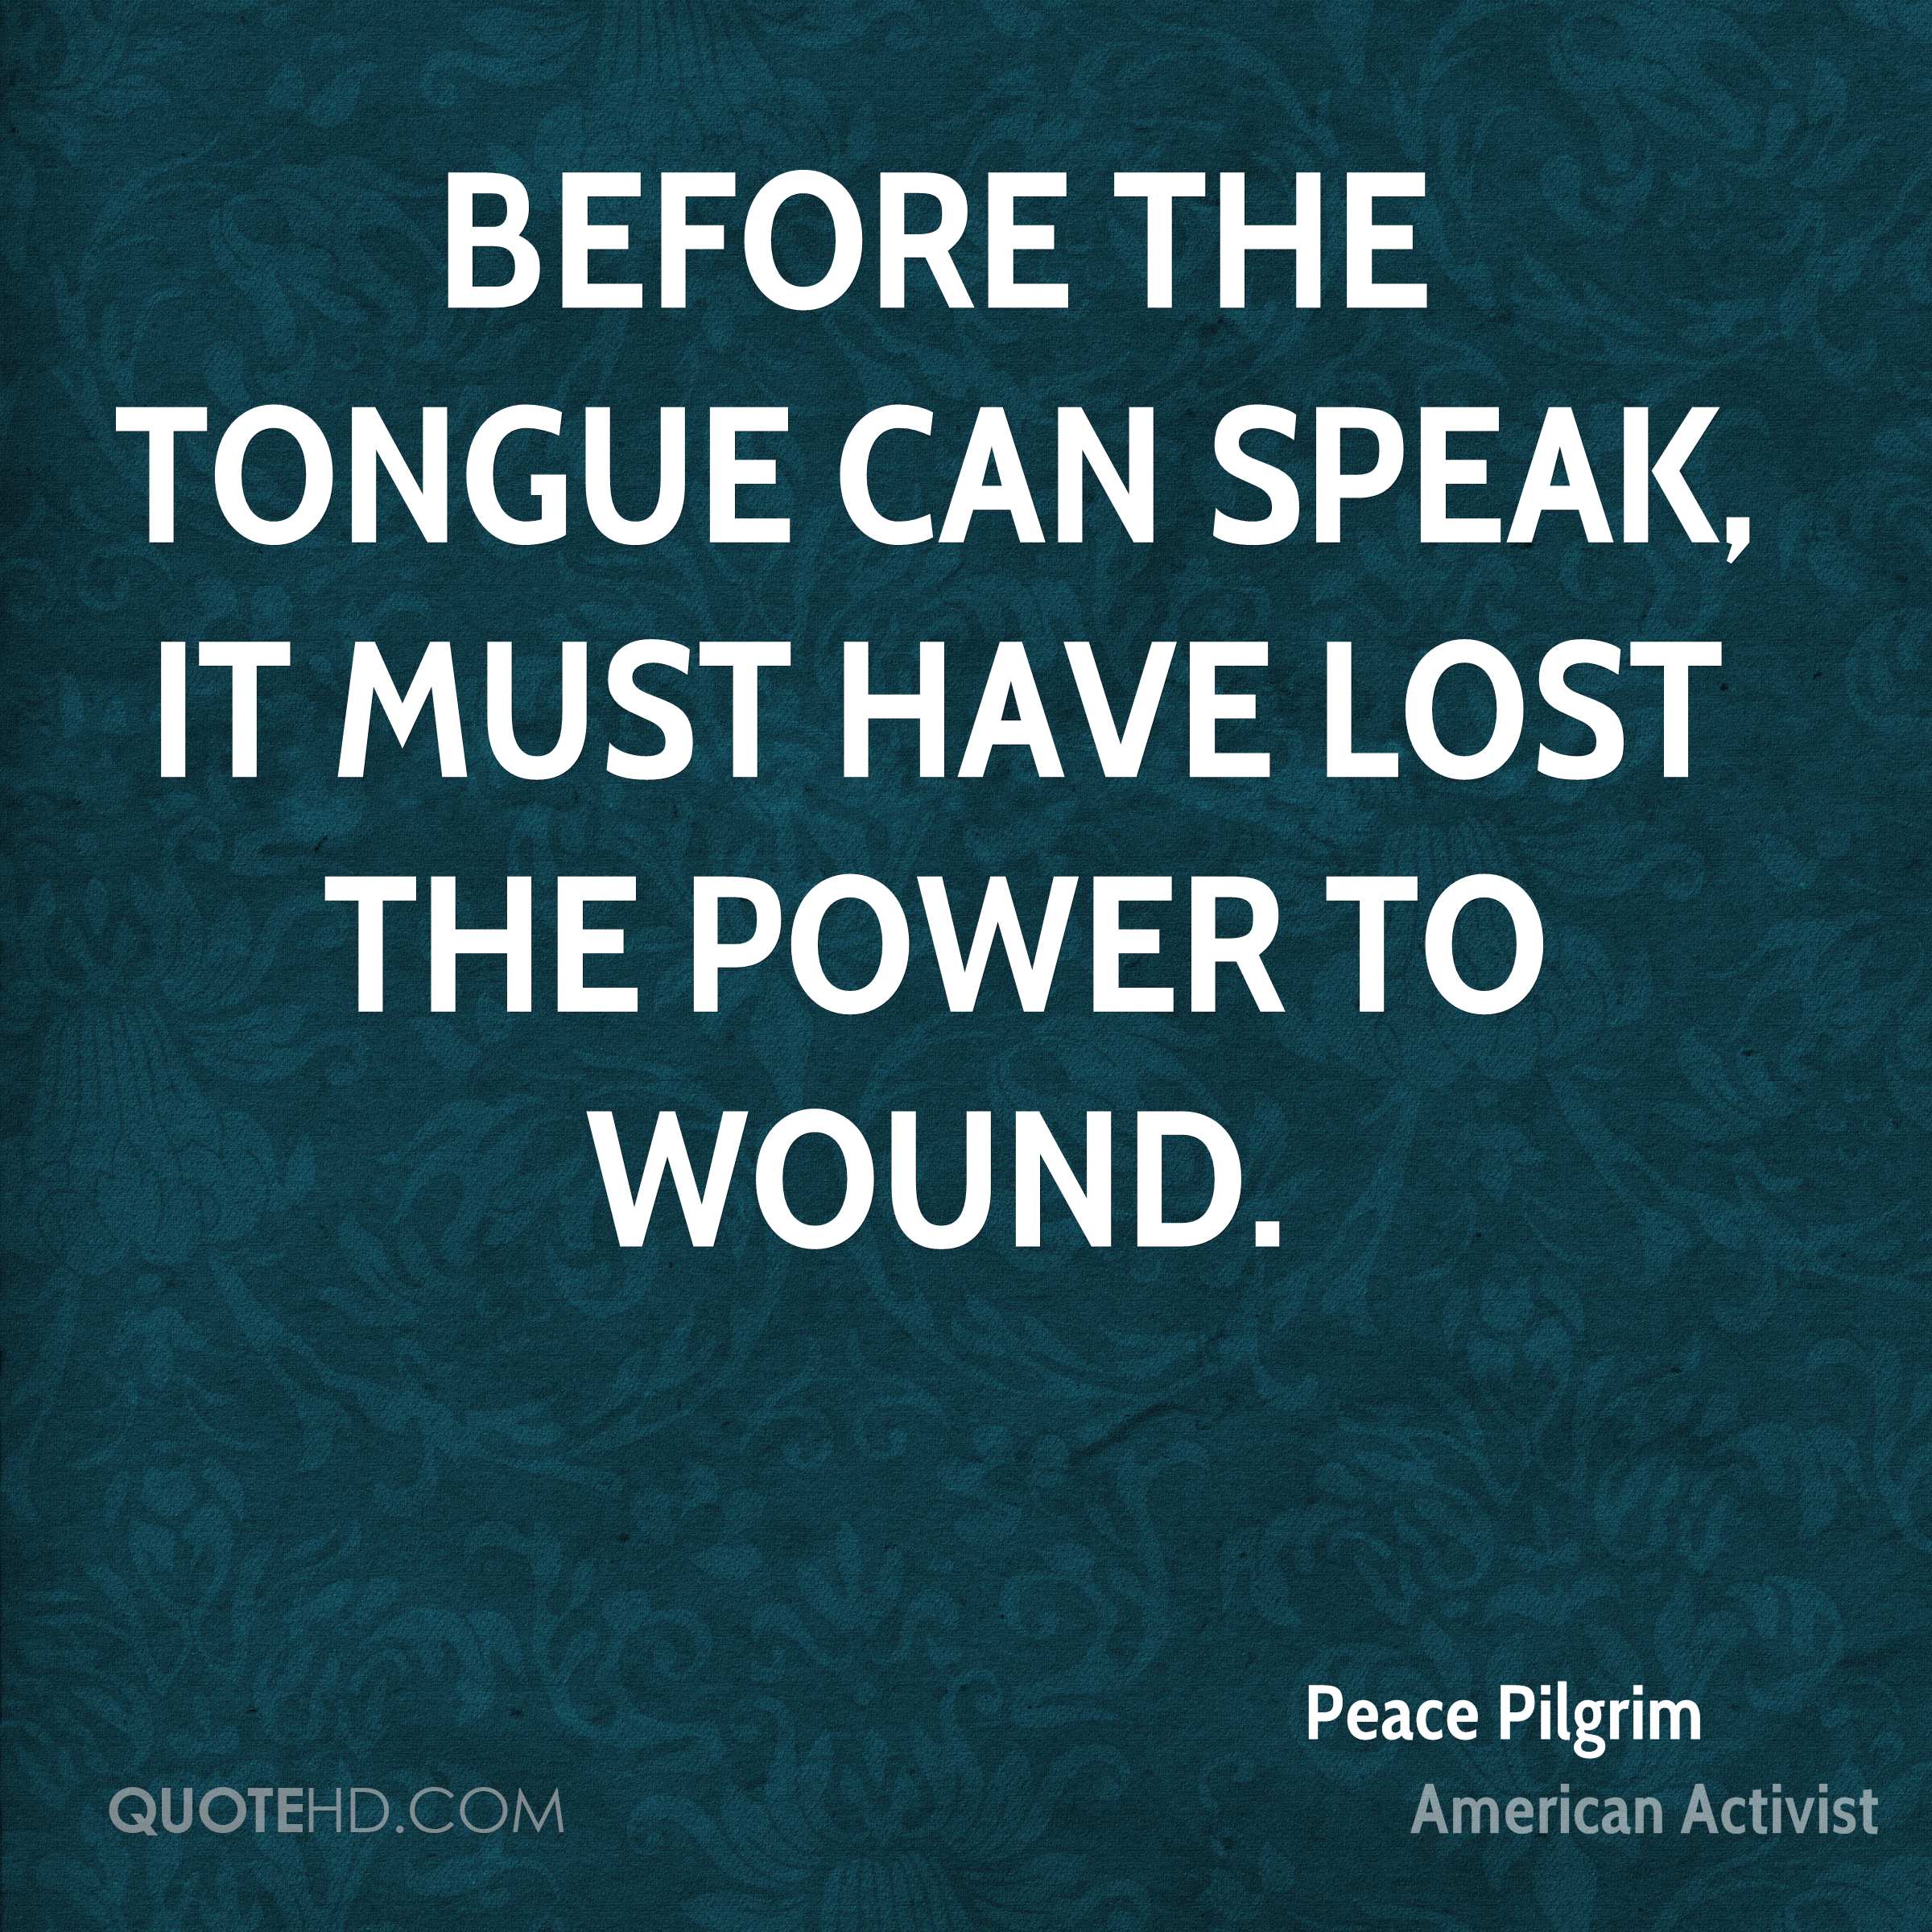 peace-pilgrim-activist-before-the-tongue-can-speak-it-must-have-lost